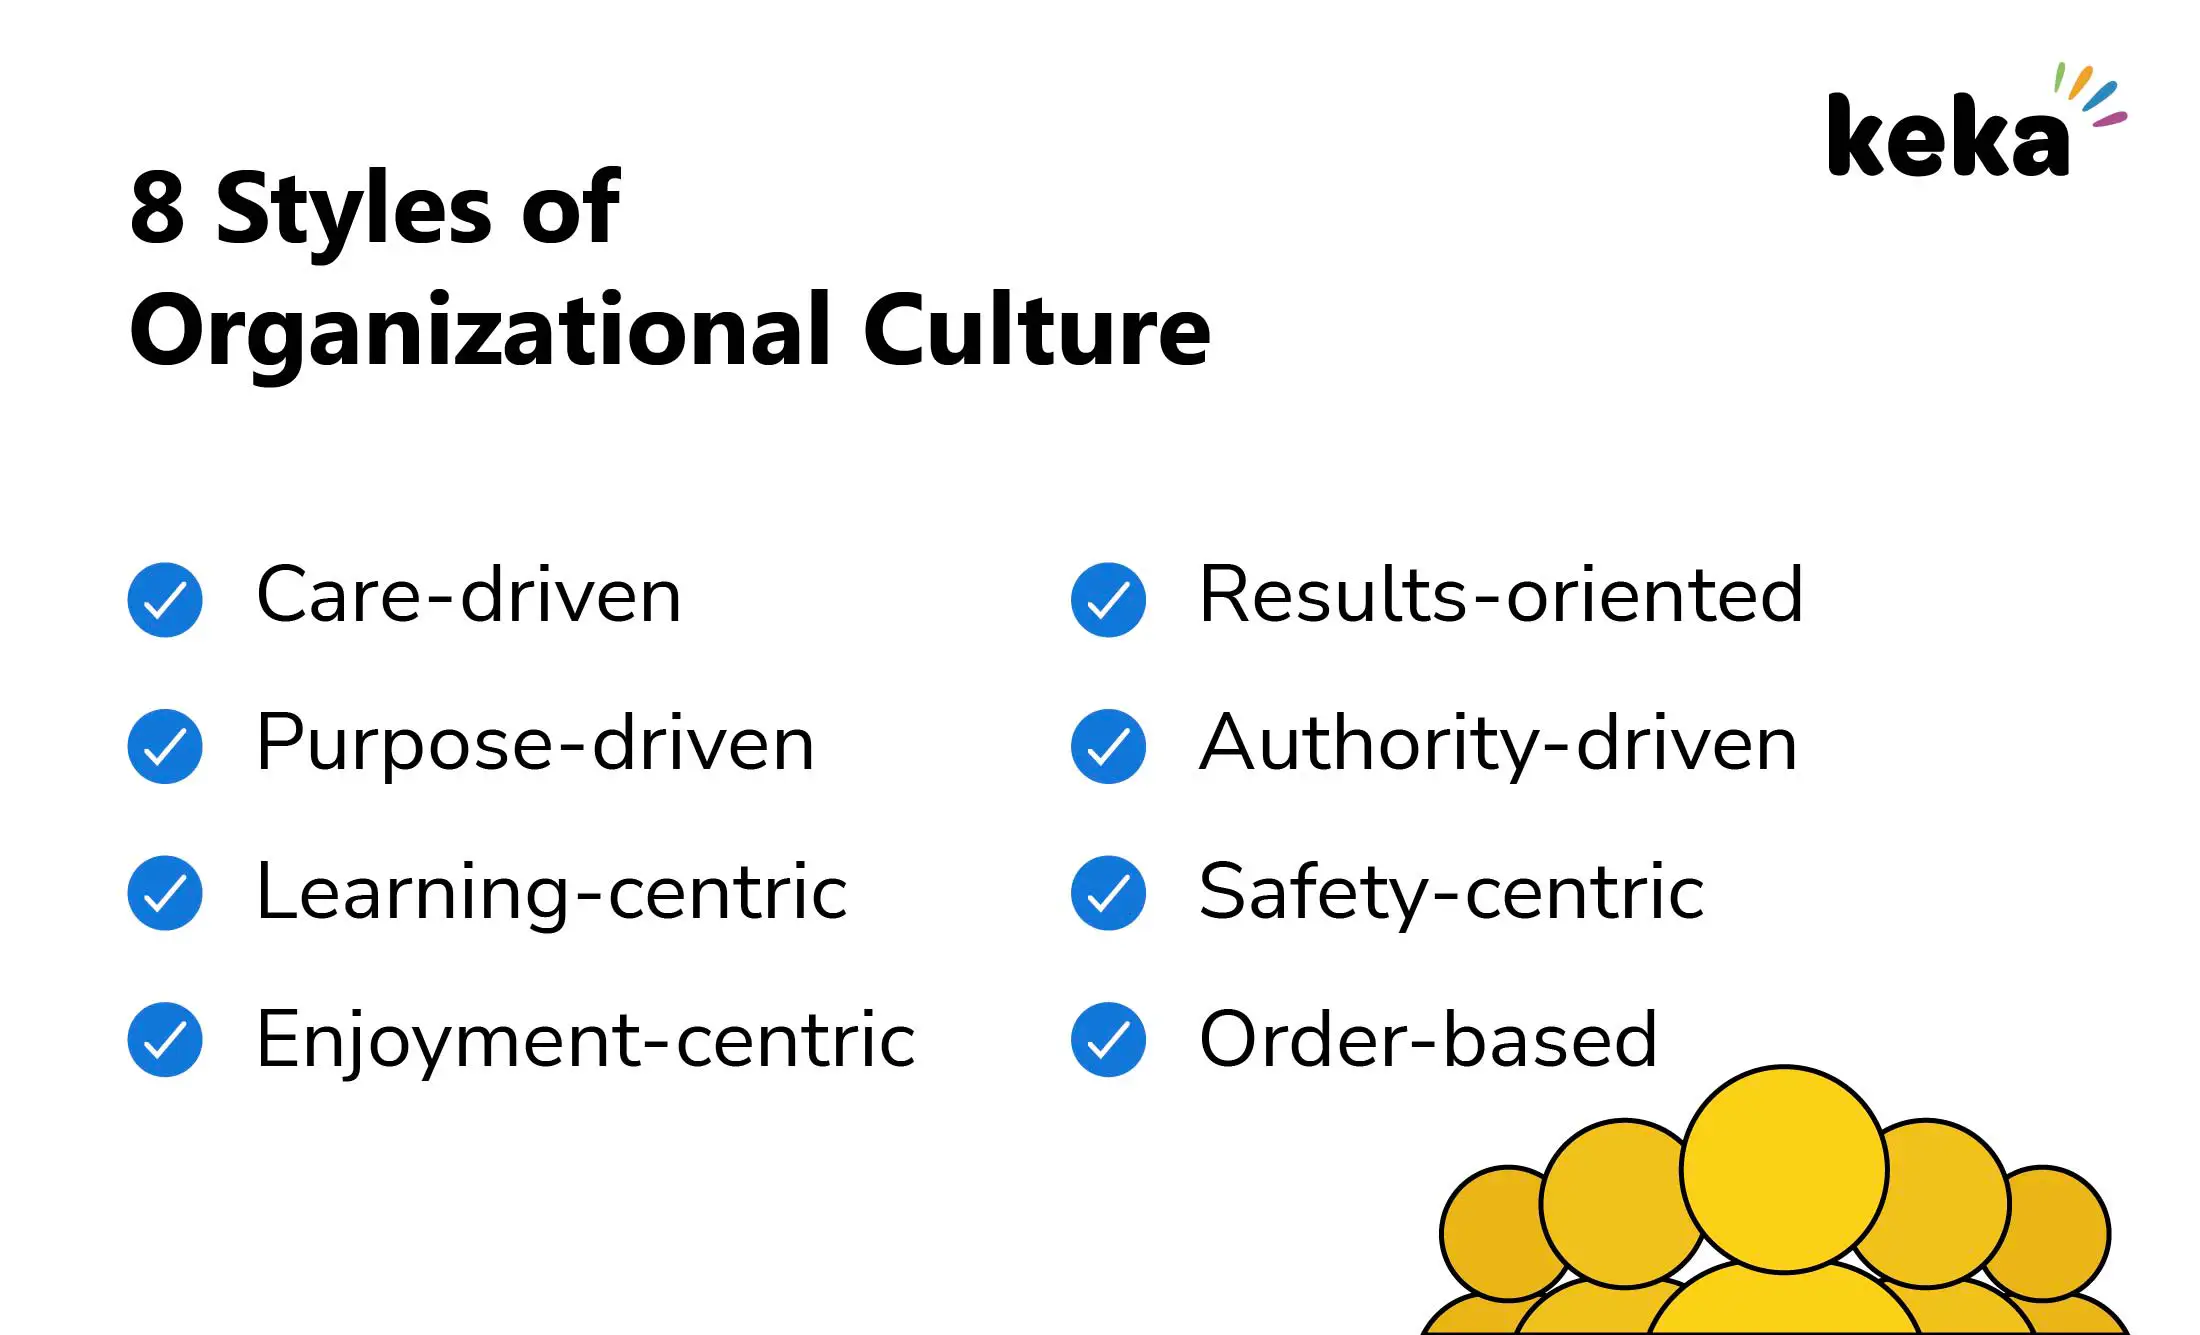 8 Styles of Organizational Culture